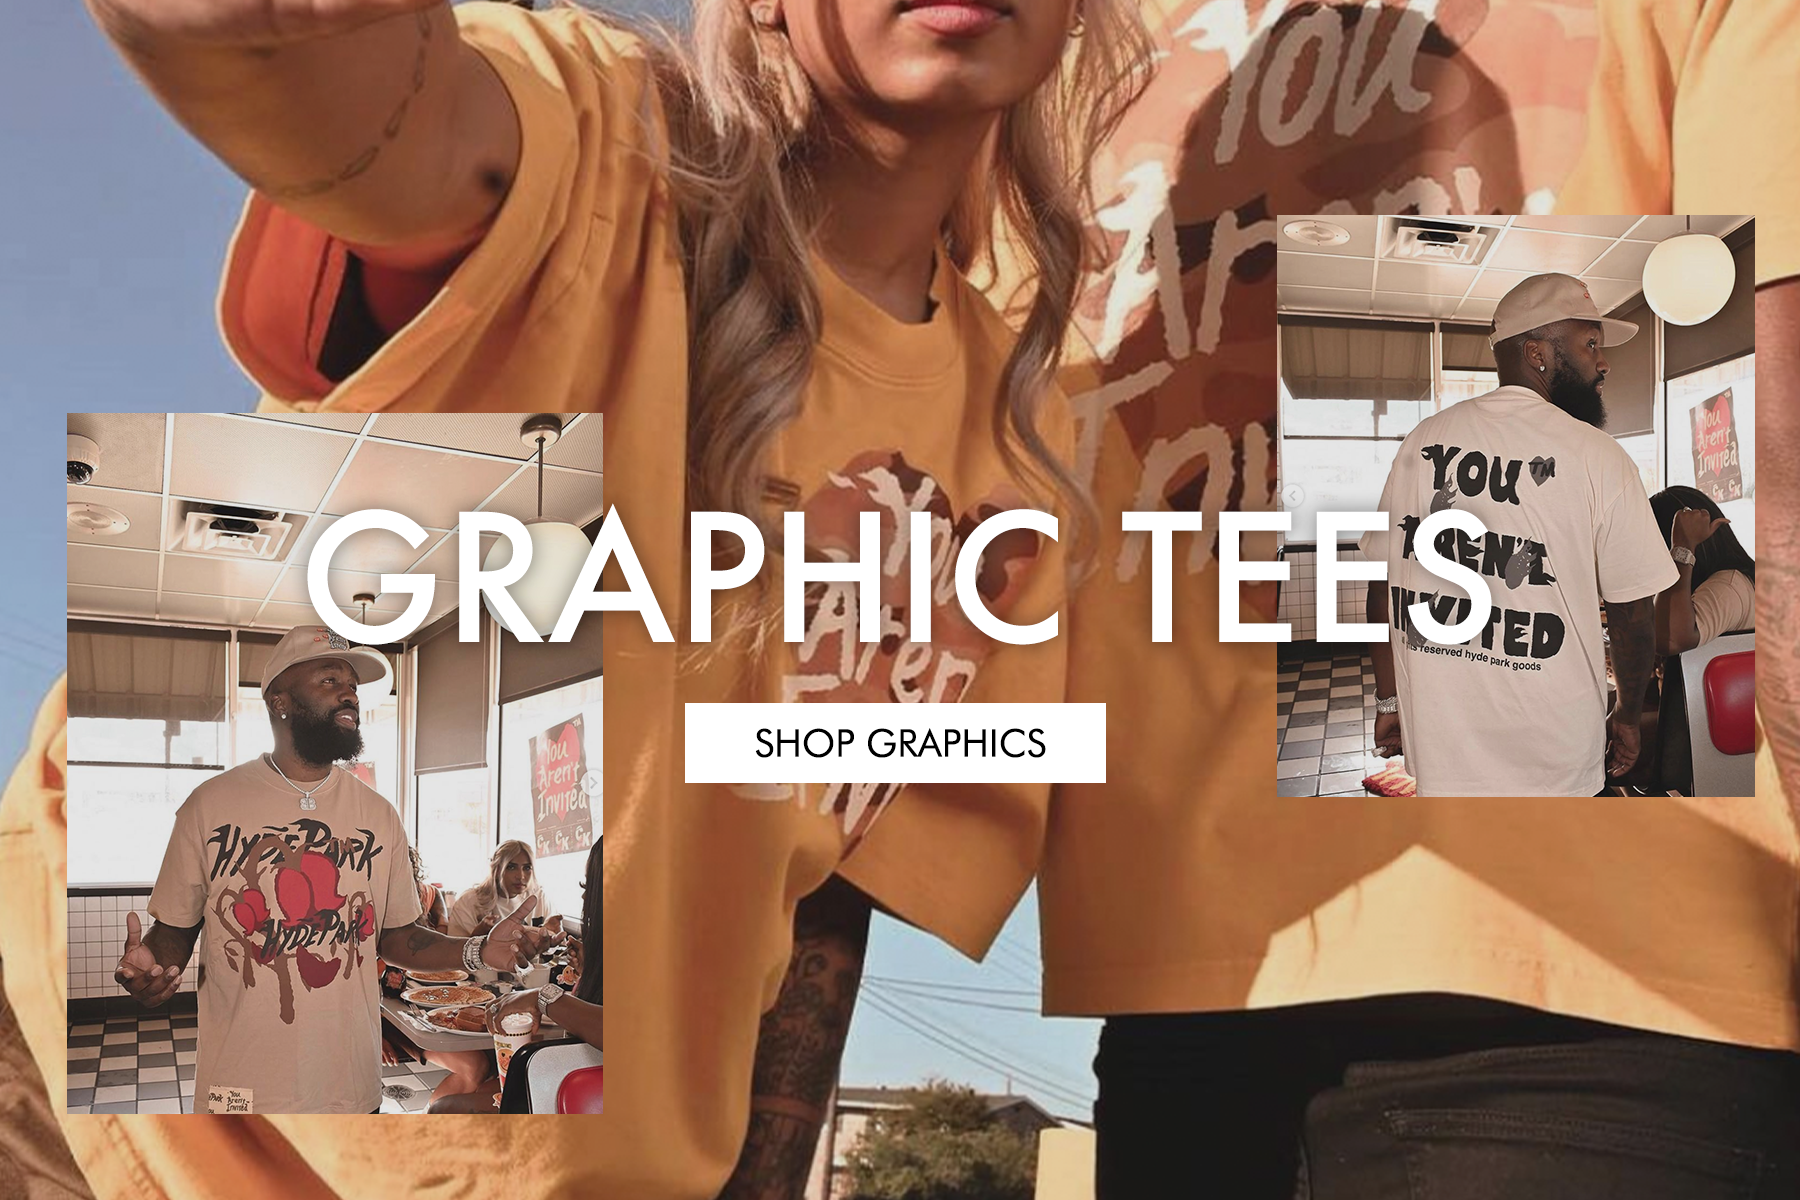 Click now to shop Graphic Tees